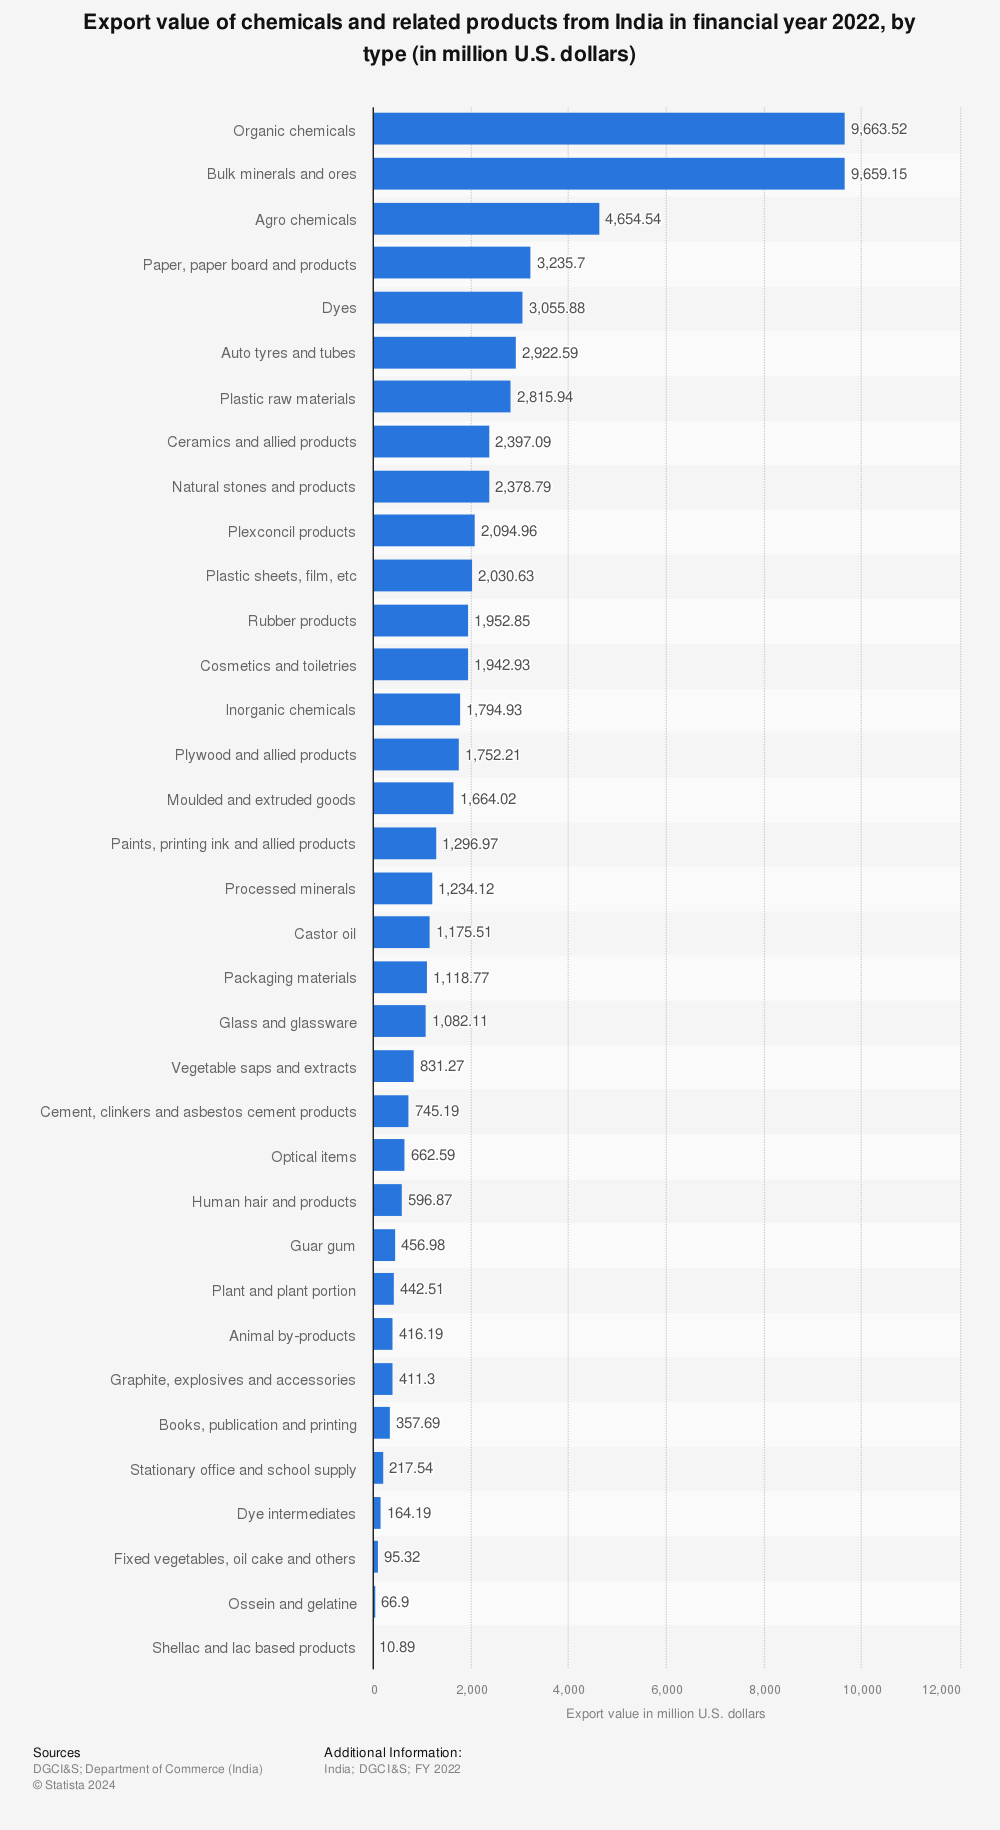 Statistic: Export value of chemicals and related products from India in financial year 2022, by type (in million U.S. dollars) | Statista